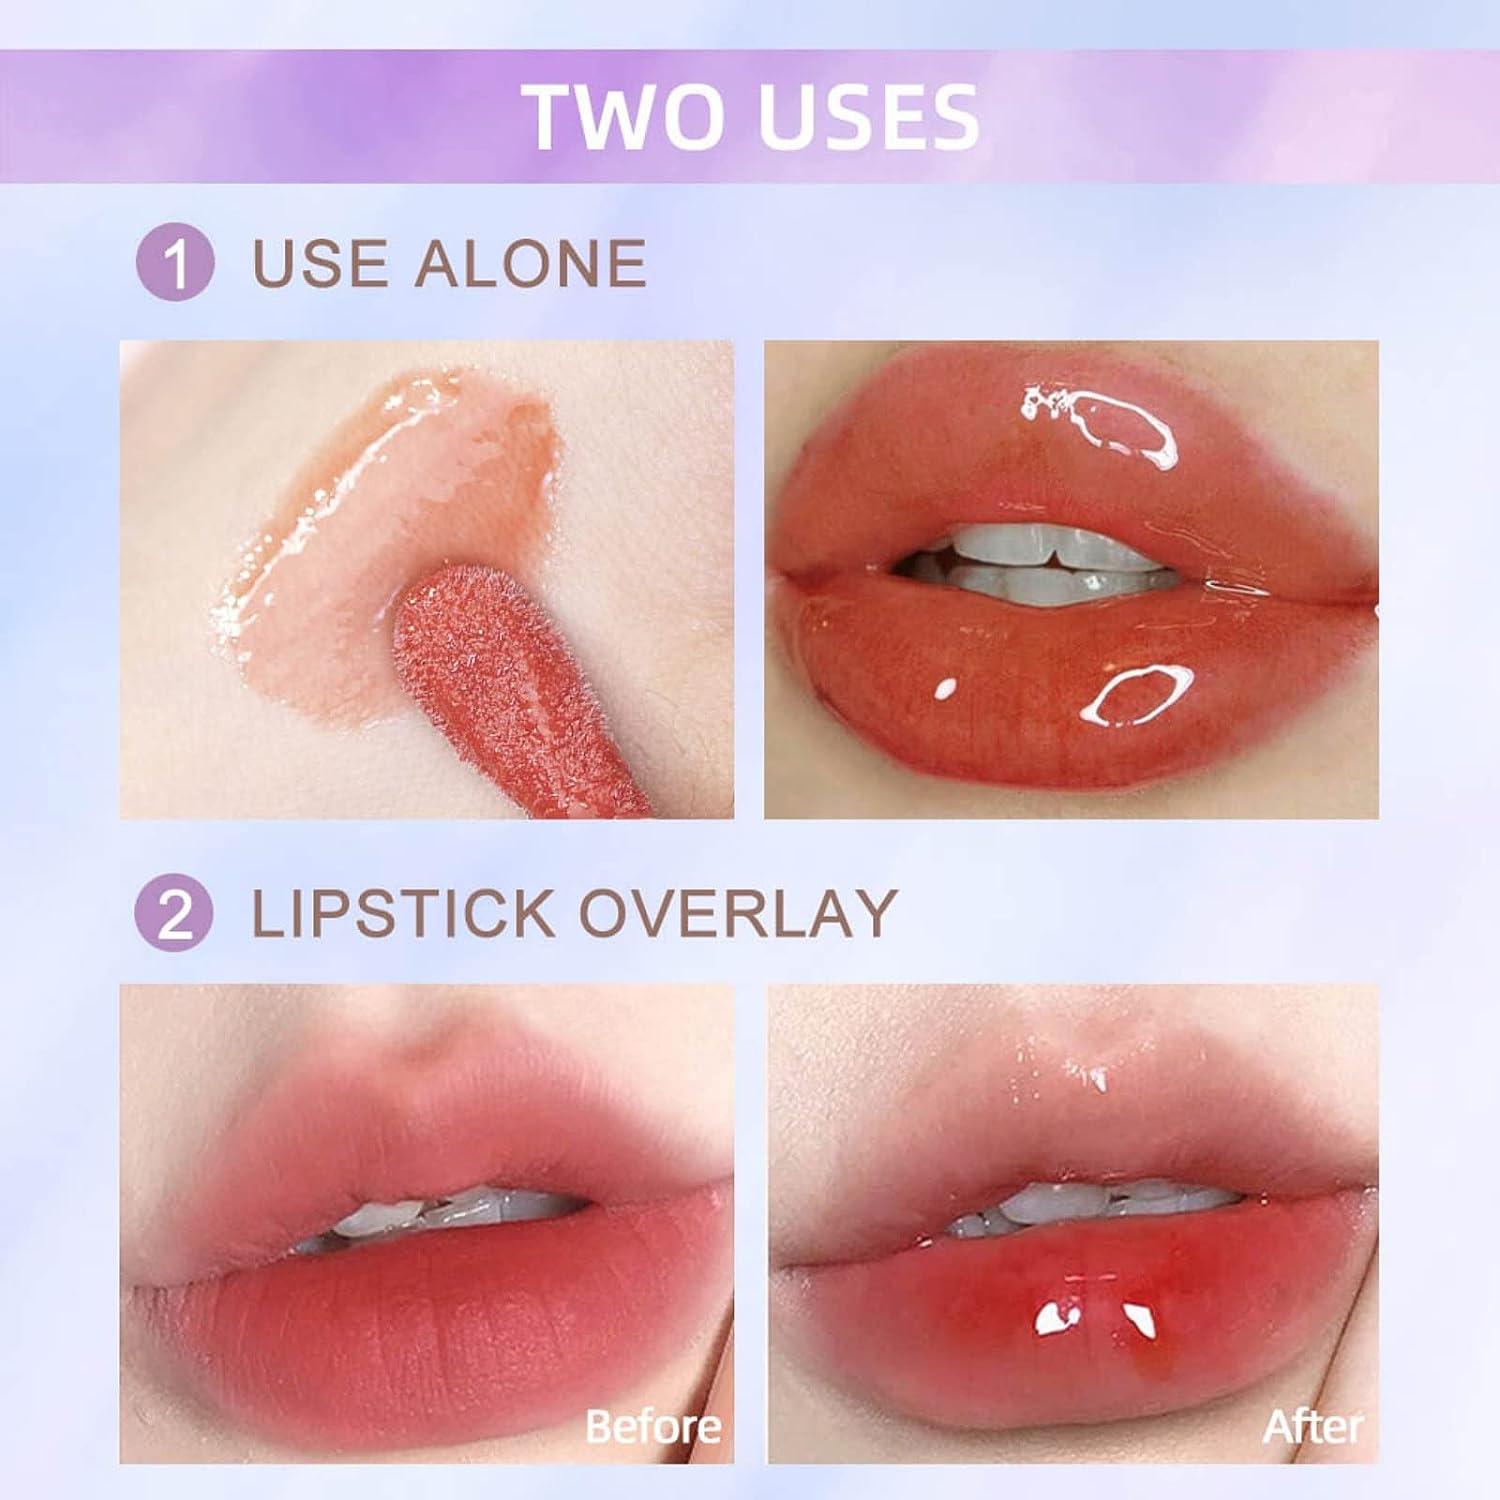 Spdoo Lip Oil Tinted Lip Glow Oil Flavored Lip Tint Gloss for Women  Hydrating Lip Gloss Tinted Plumping Lip Oils for Dry Lips Lip Oil Gloss (A)